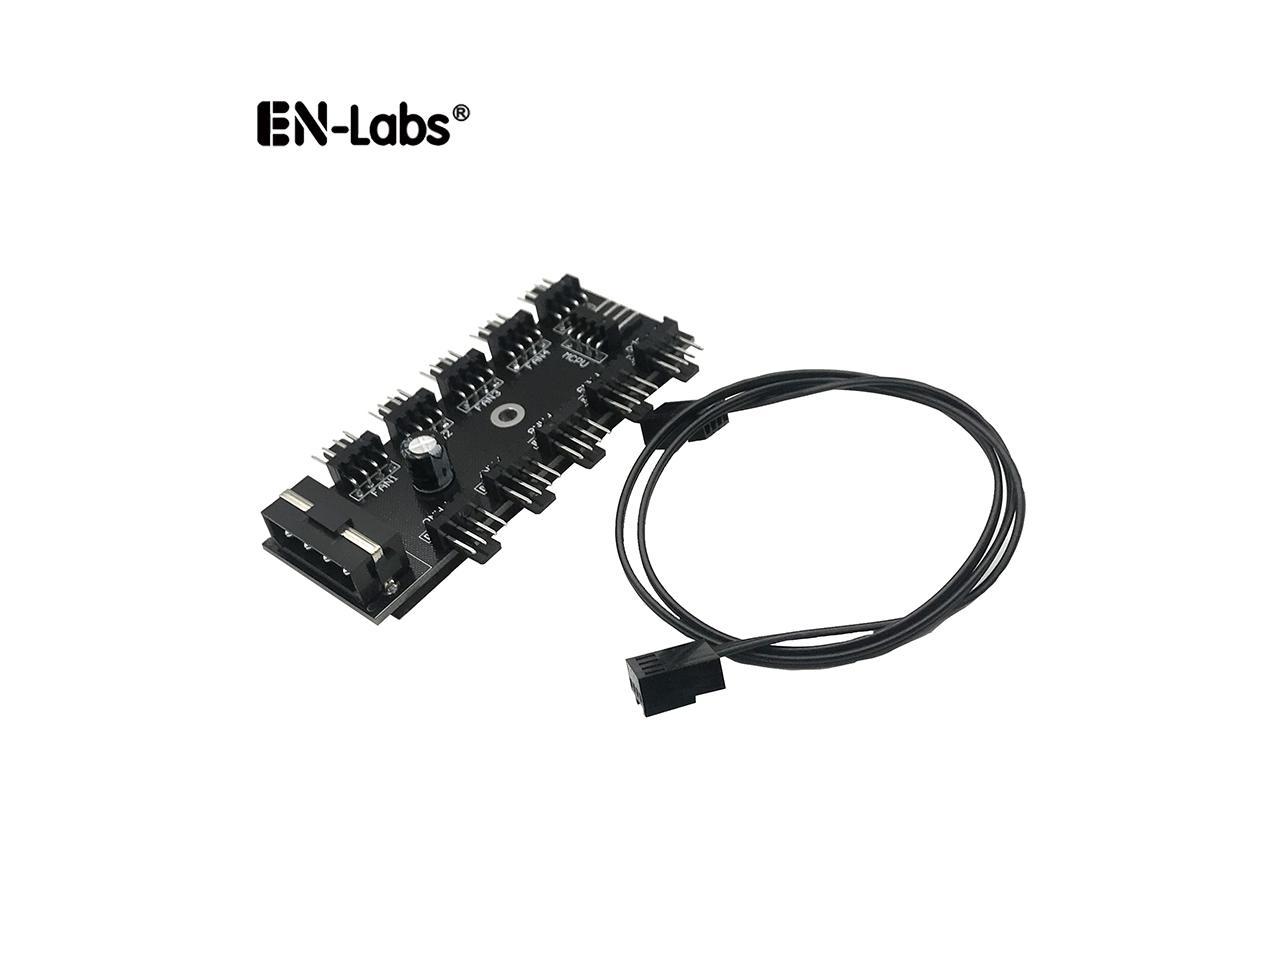 1 to 10 4Pin SATA Cooling Fan Hub Molex Cooler Splitter Cable PWM 12V Led Speed Power Supply Adapter for Mining Computer XT-XINTE PC 1 to 10 4Pin 